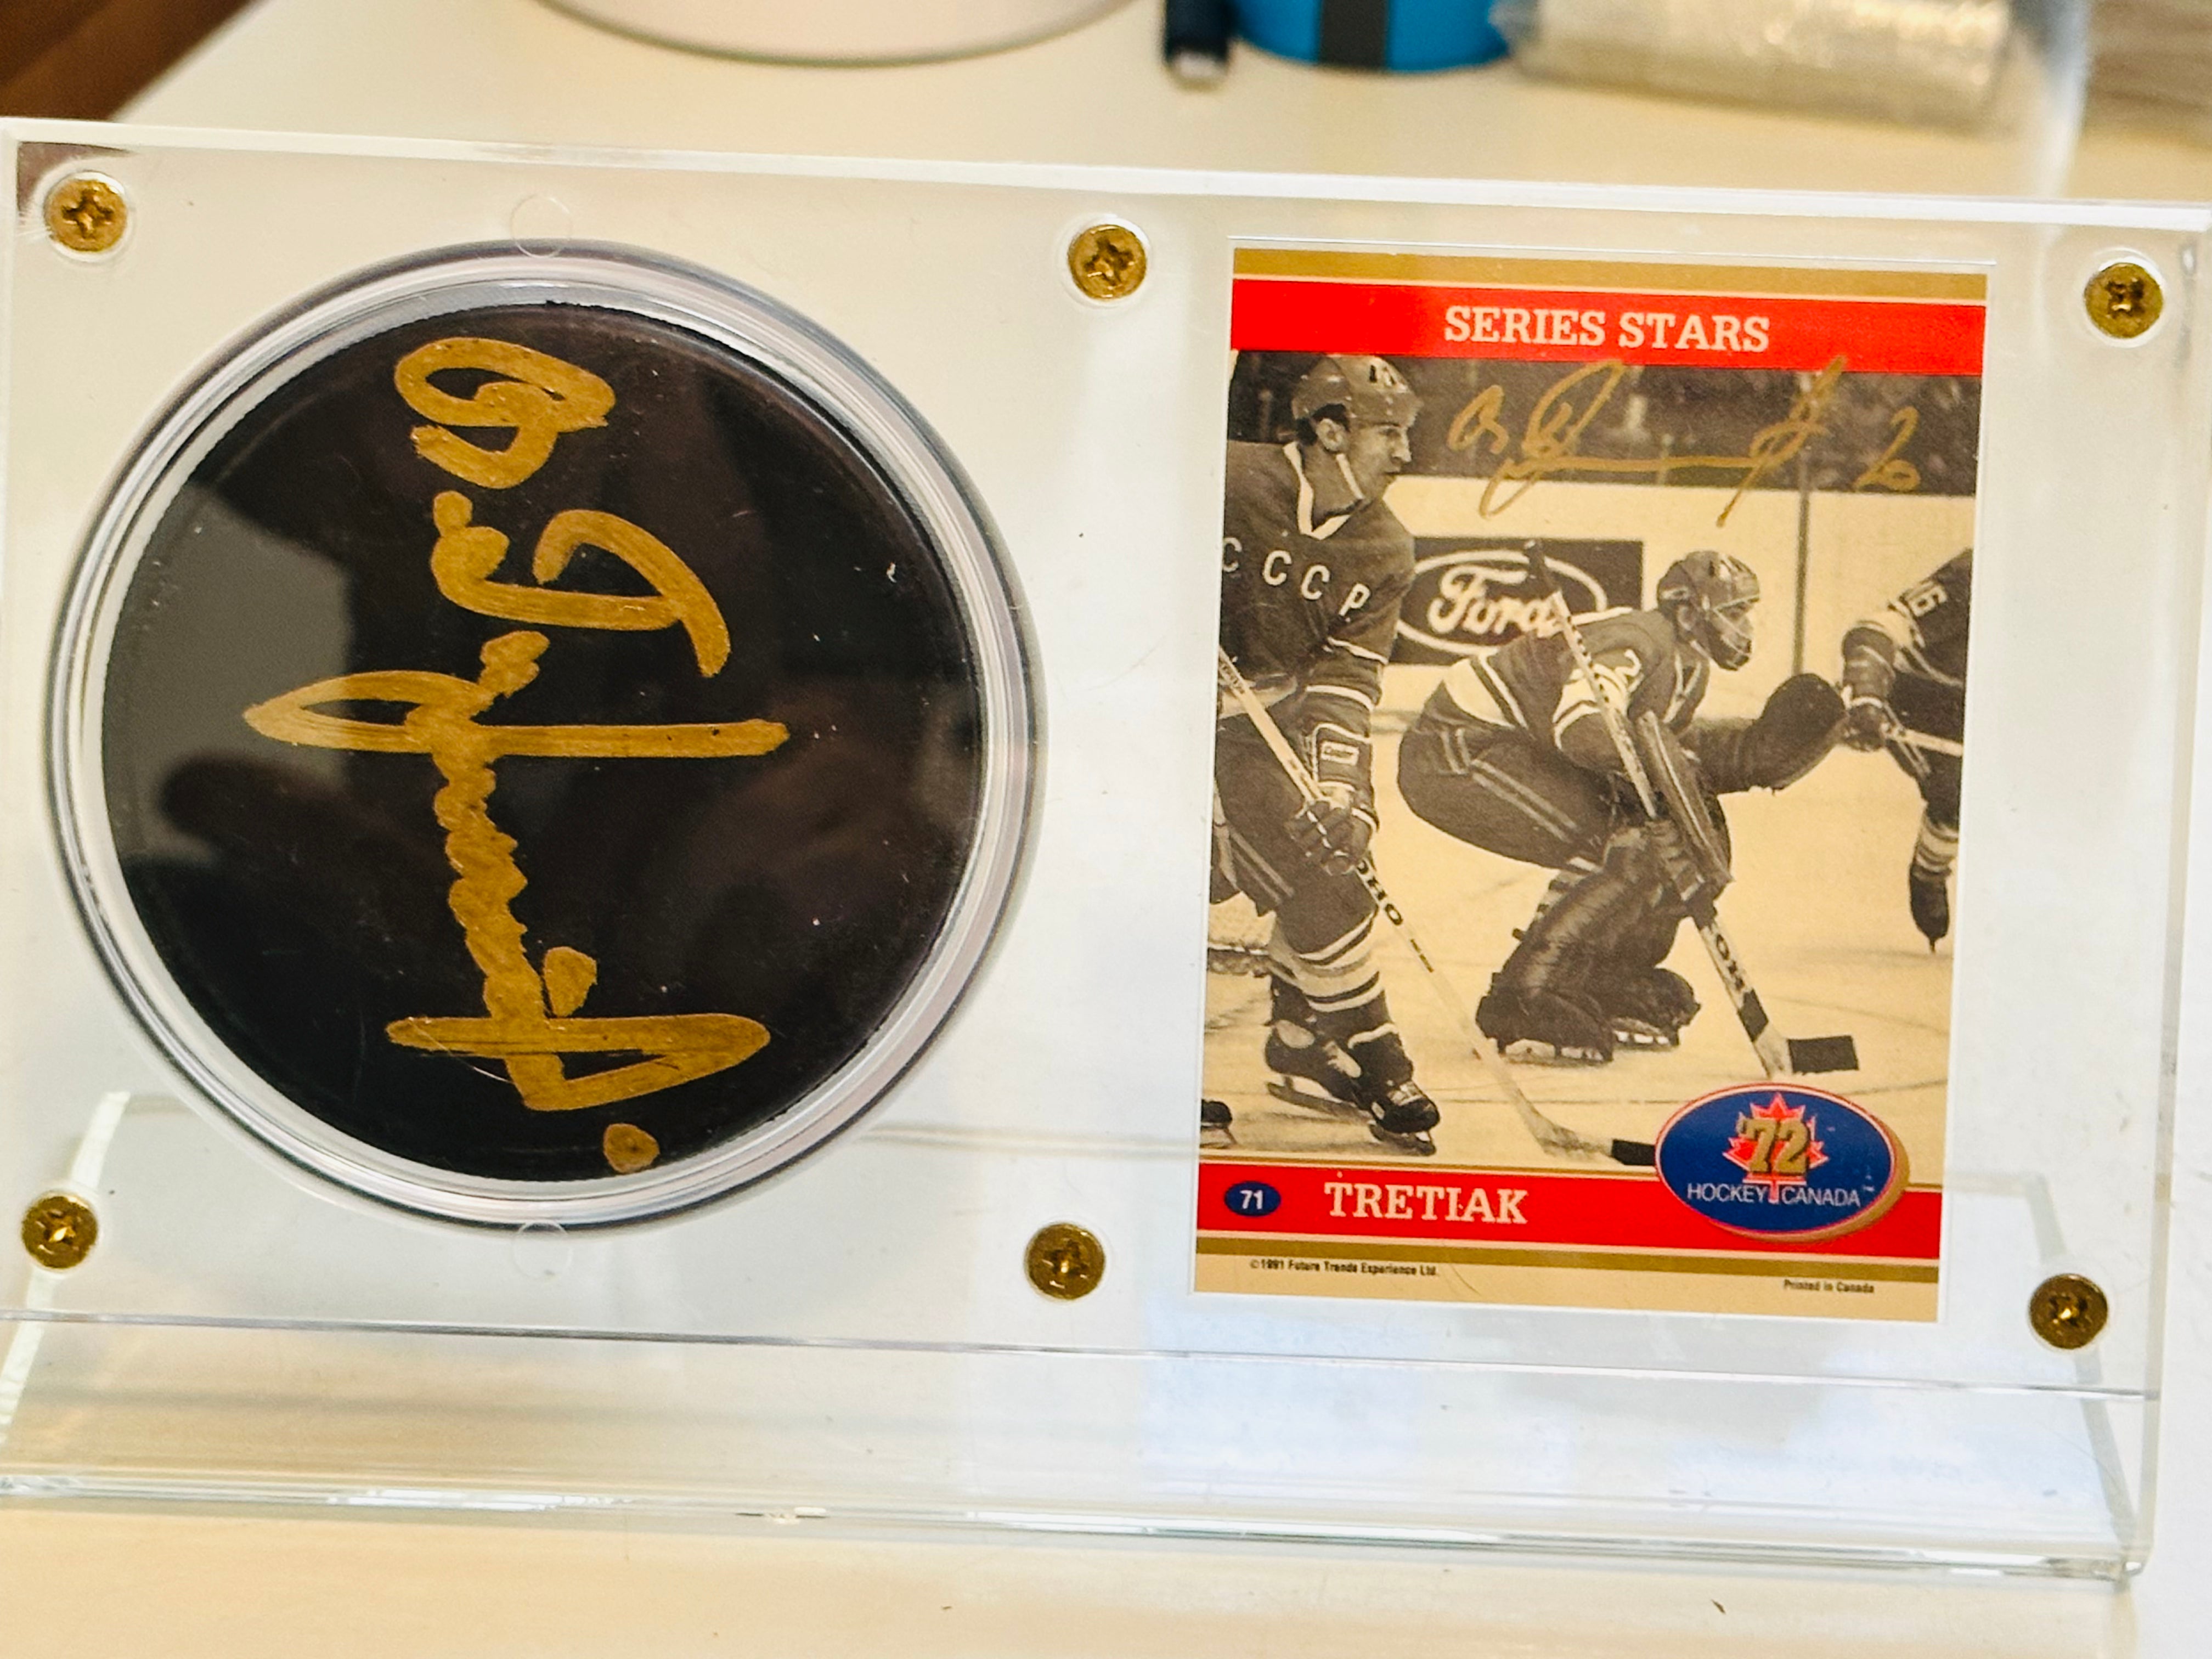 Vlad Tretiak double autographs signed puck and card in holder display with COA